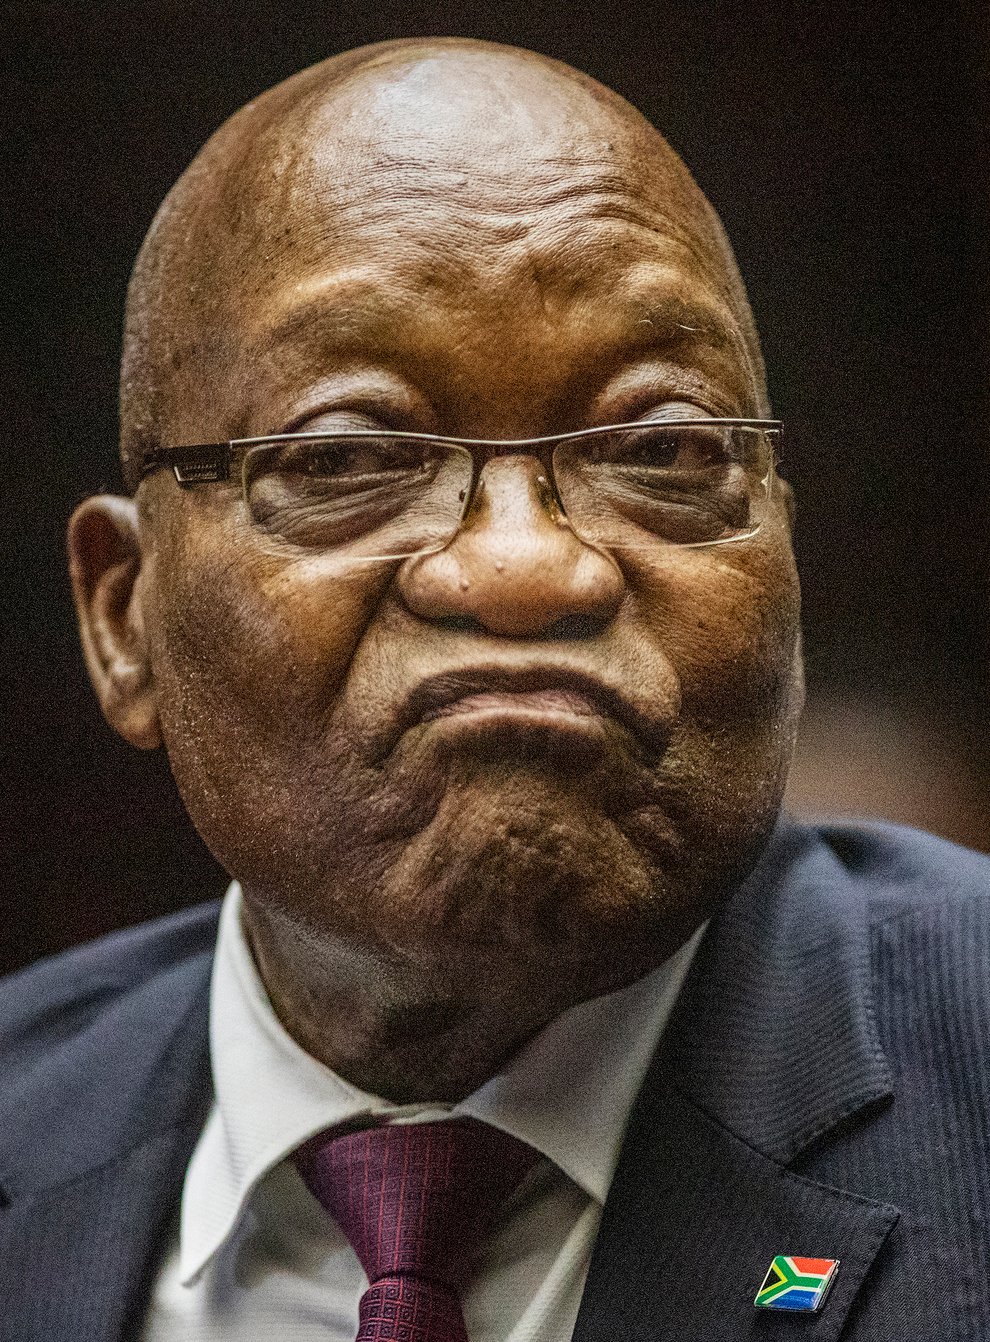 Former South African president Jacob Zuma (Michele Spataril/AP)